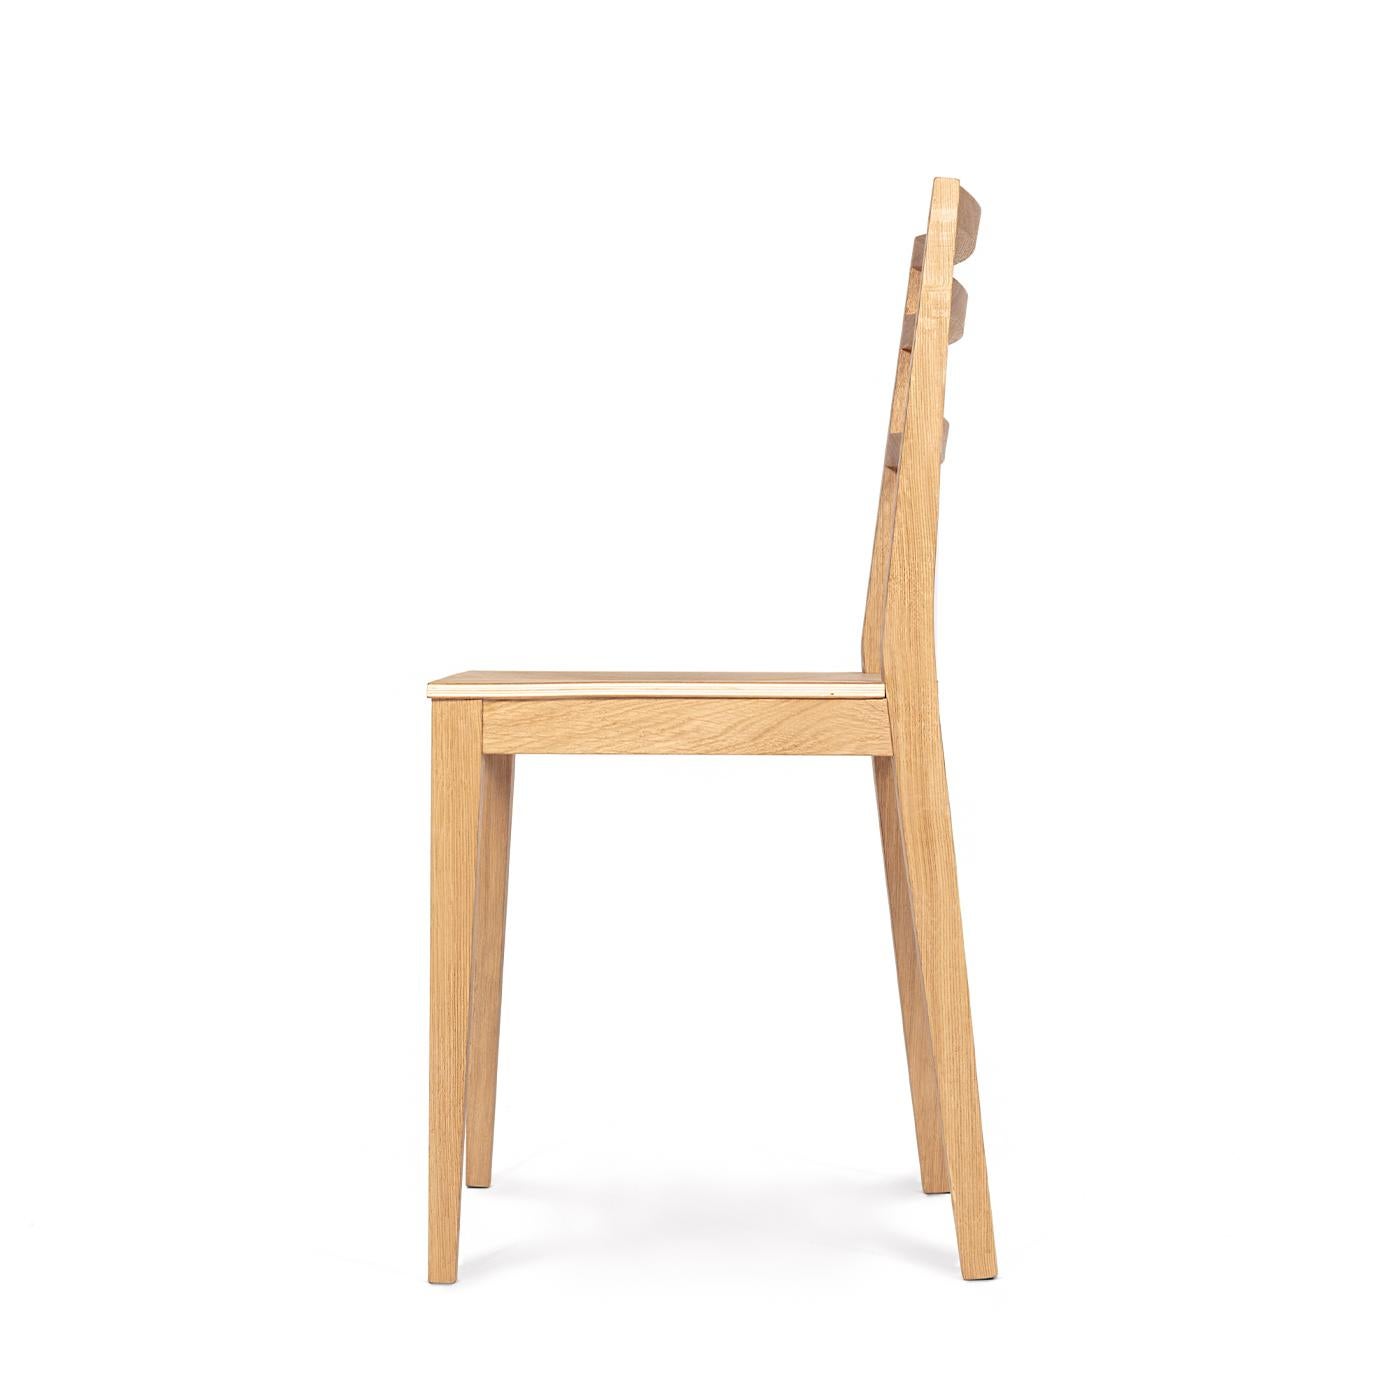 This set of modern chairs in solid oak is a perfect addition to a living or home space with a modern touch. The chairs are coated in an oil finish, giving them clean, simple lines and making them impossible not to love. A backrest that is slightly